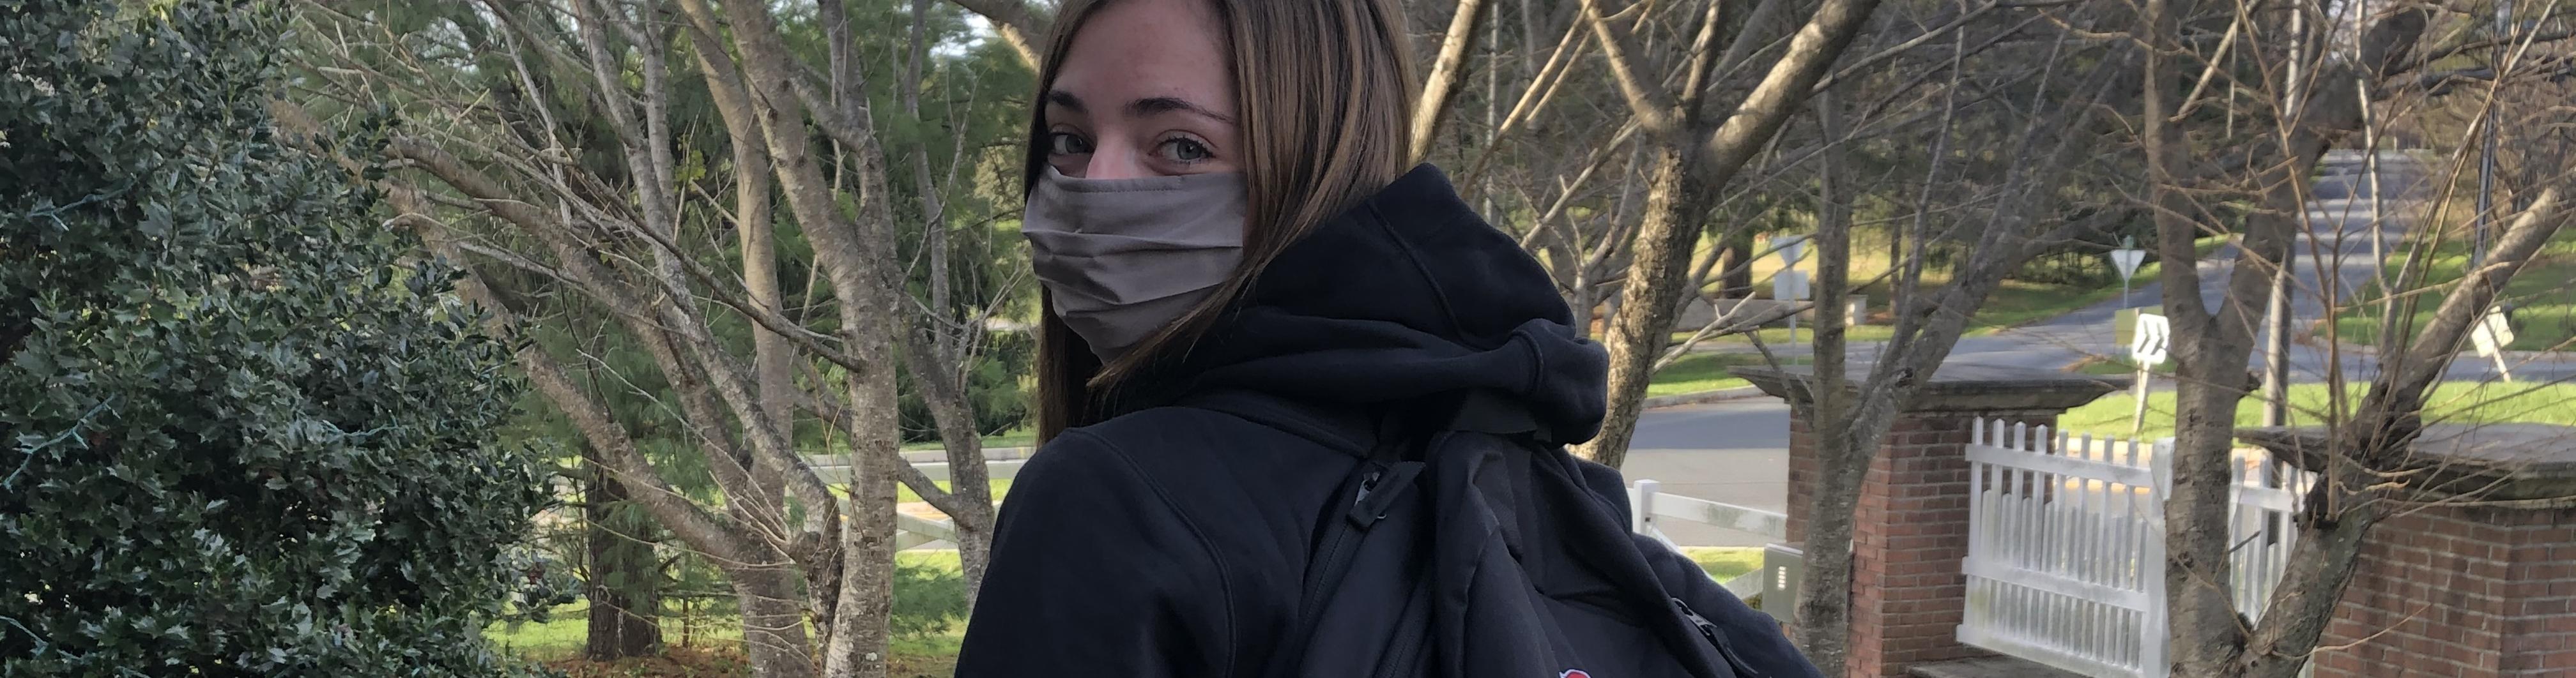 A student wearing a mask looks at the camera